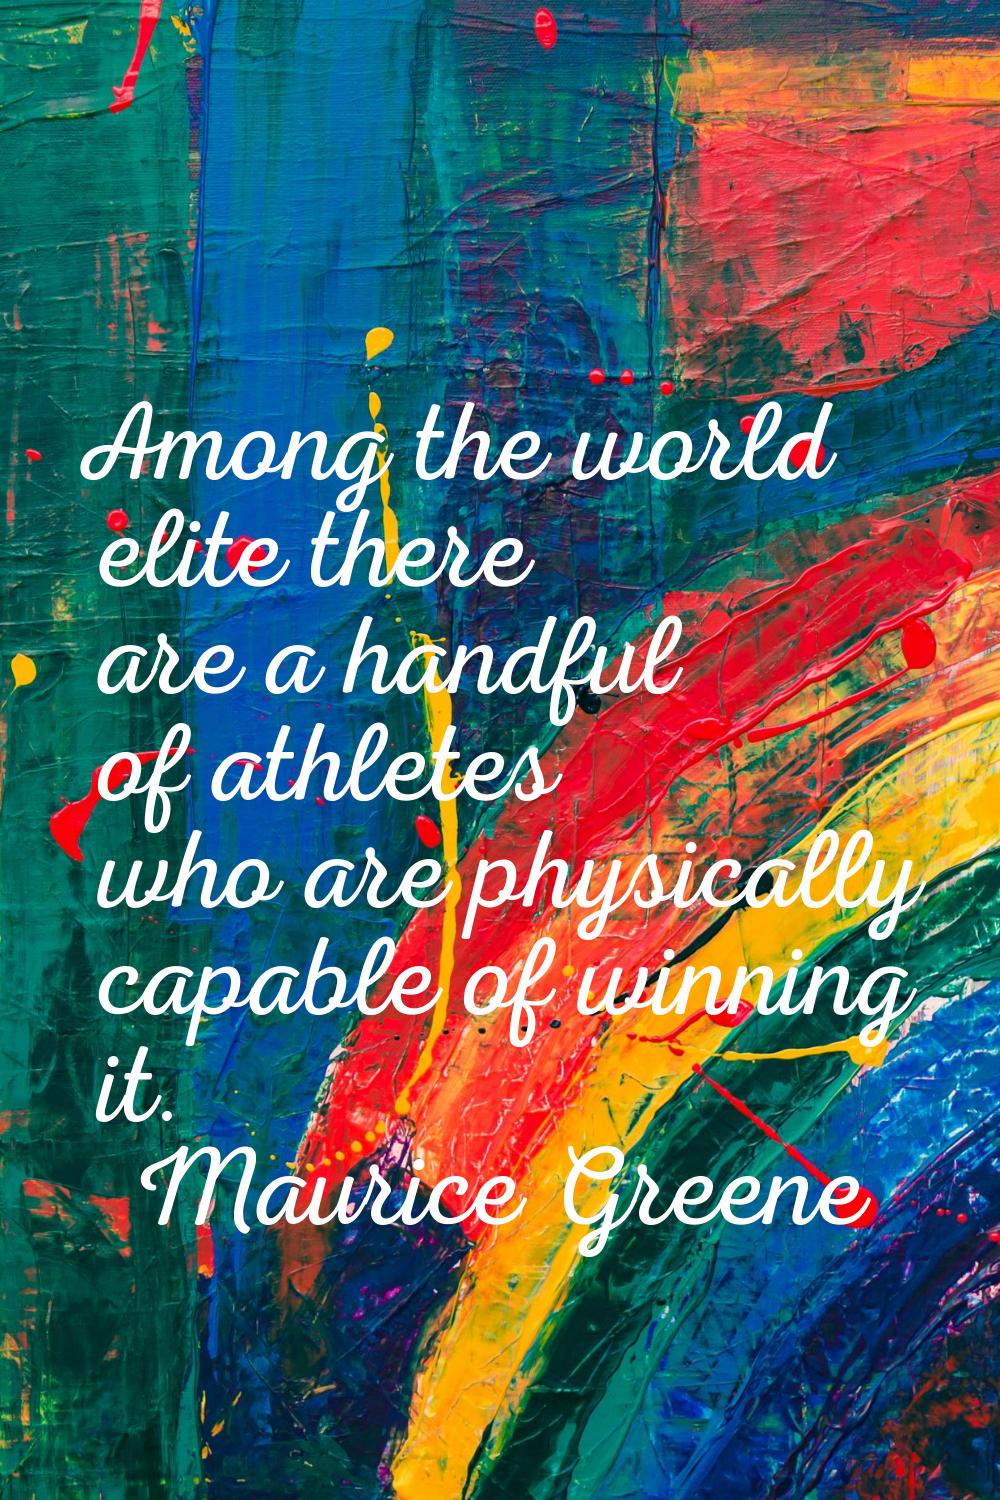 Among the world elite there are a handful of athletes who are physically capable of winning it.